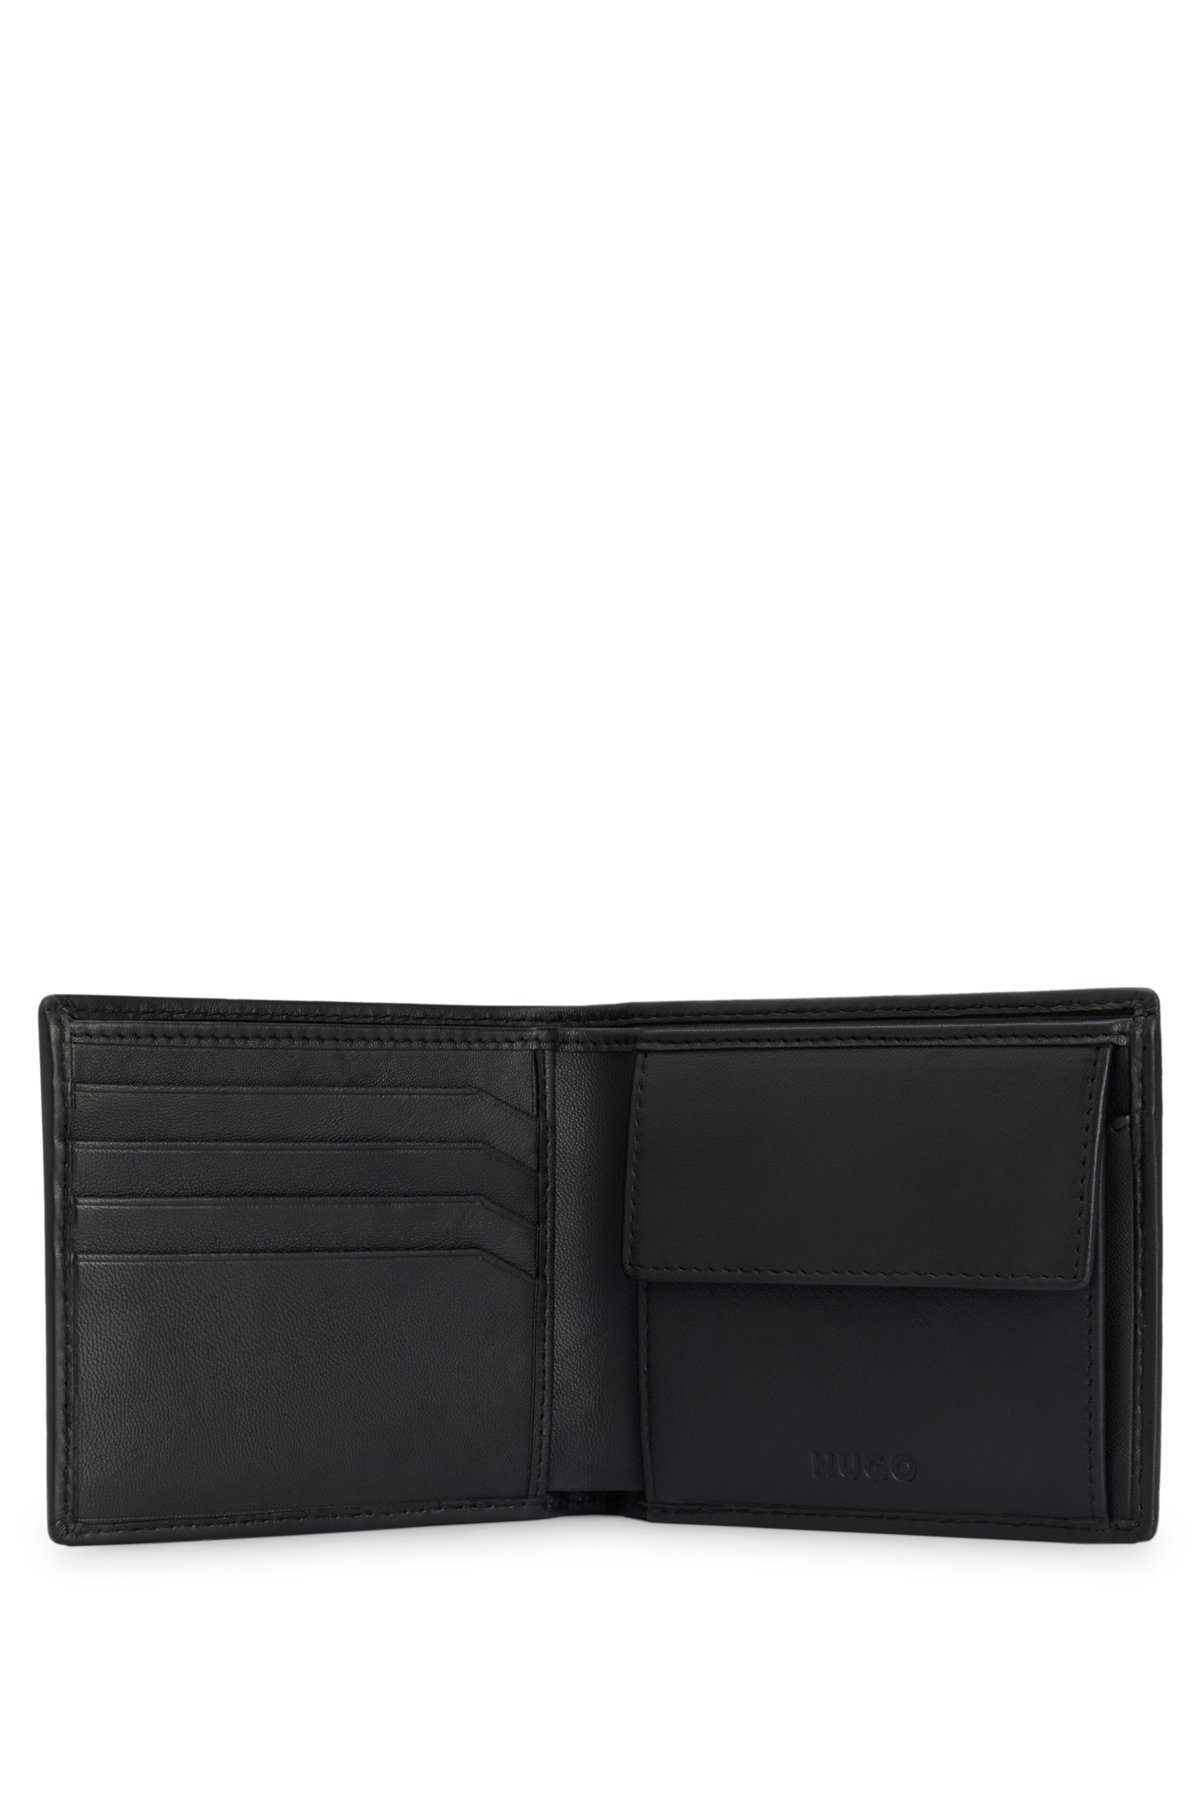 Nappa-leather wallet with stacked logo and coin pocket, Black